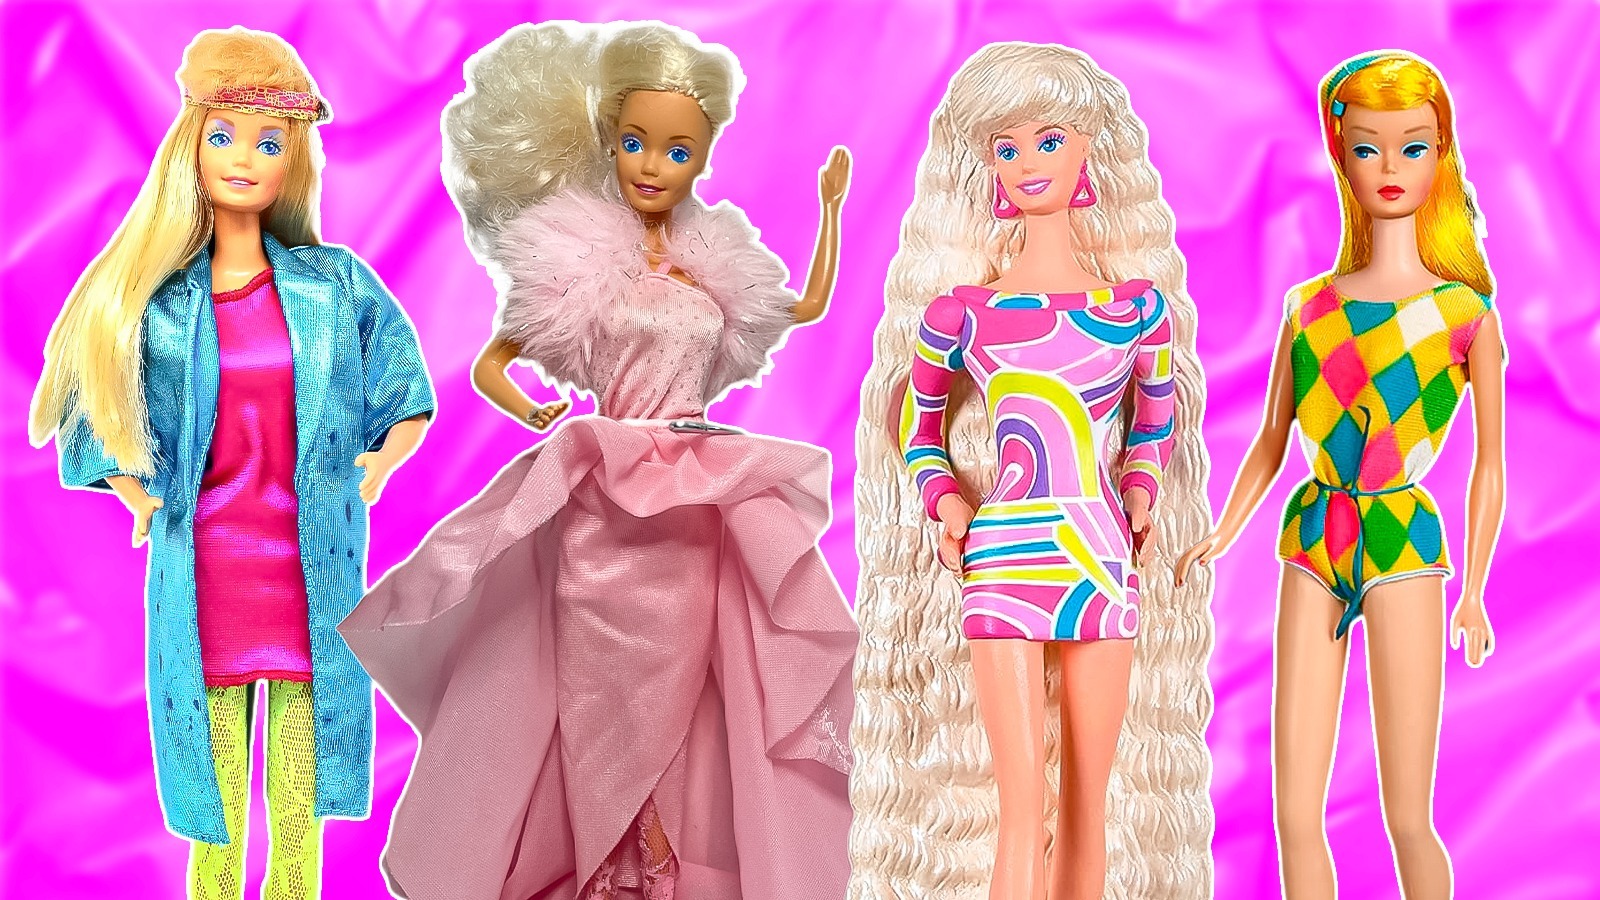 Sold at Auction: Group of 3 Mattel Barbie Toys R Us Fashion Doll